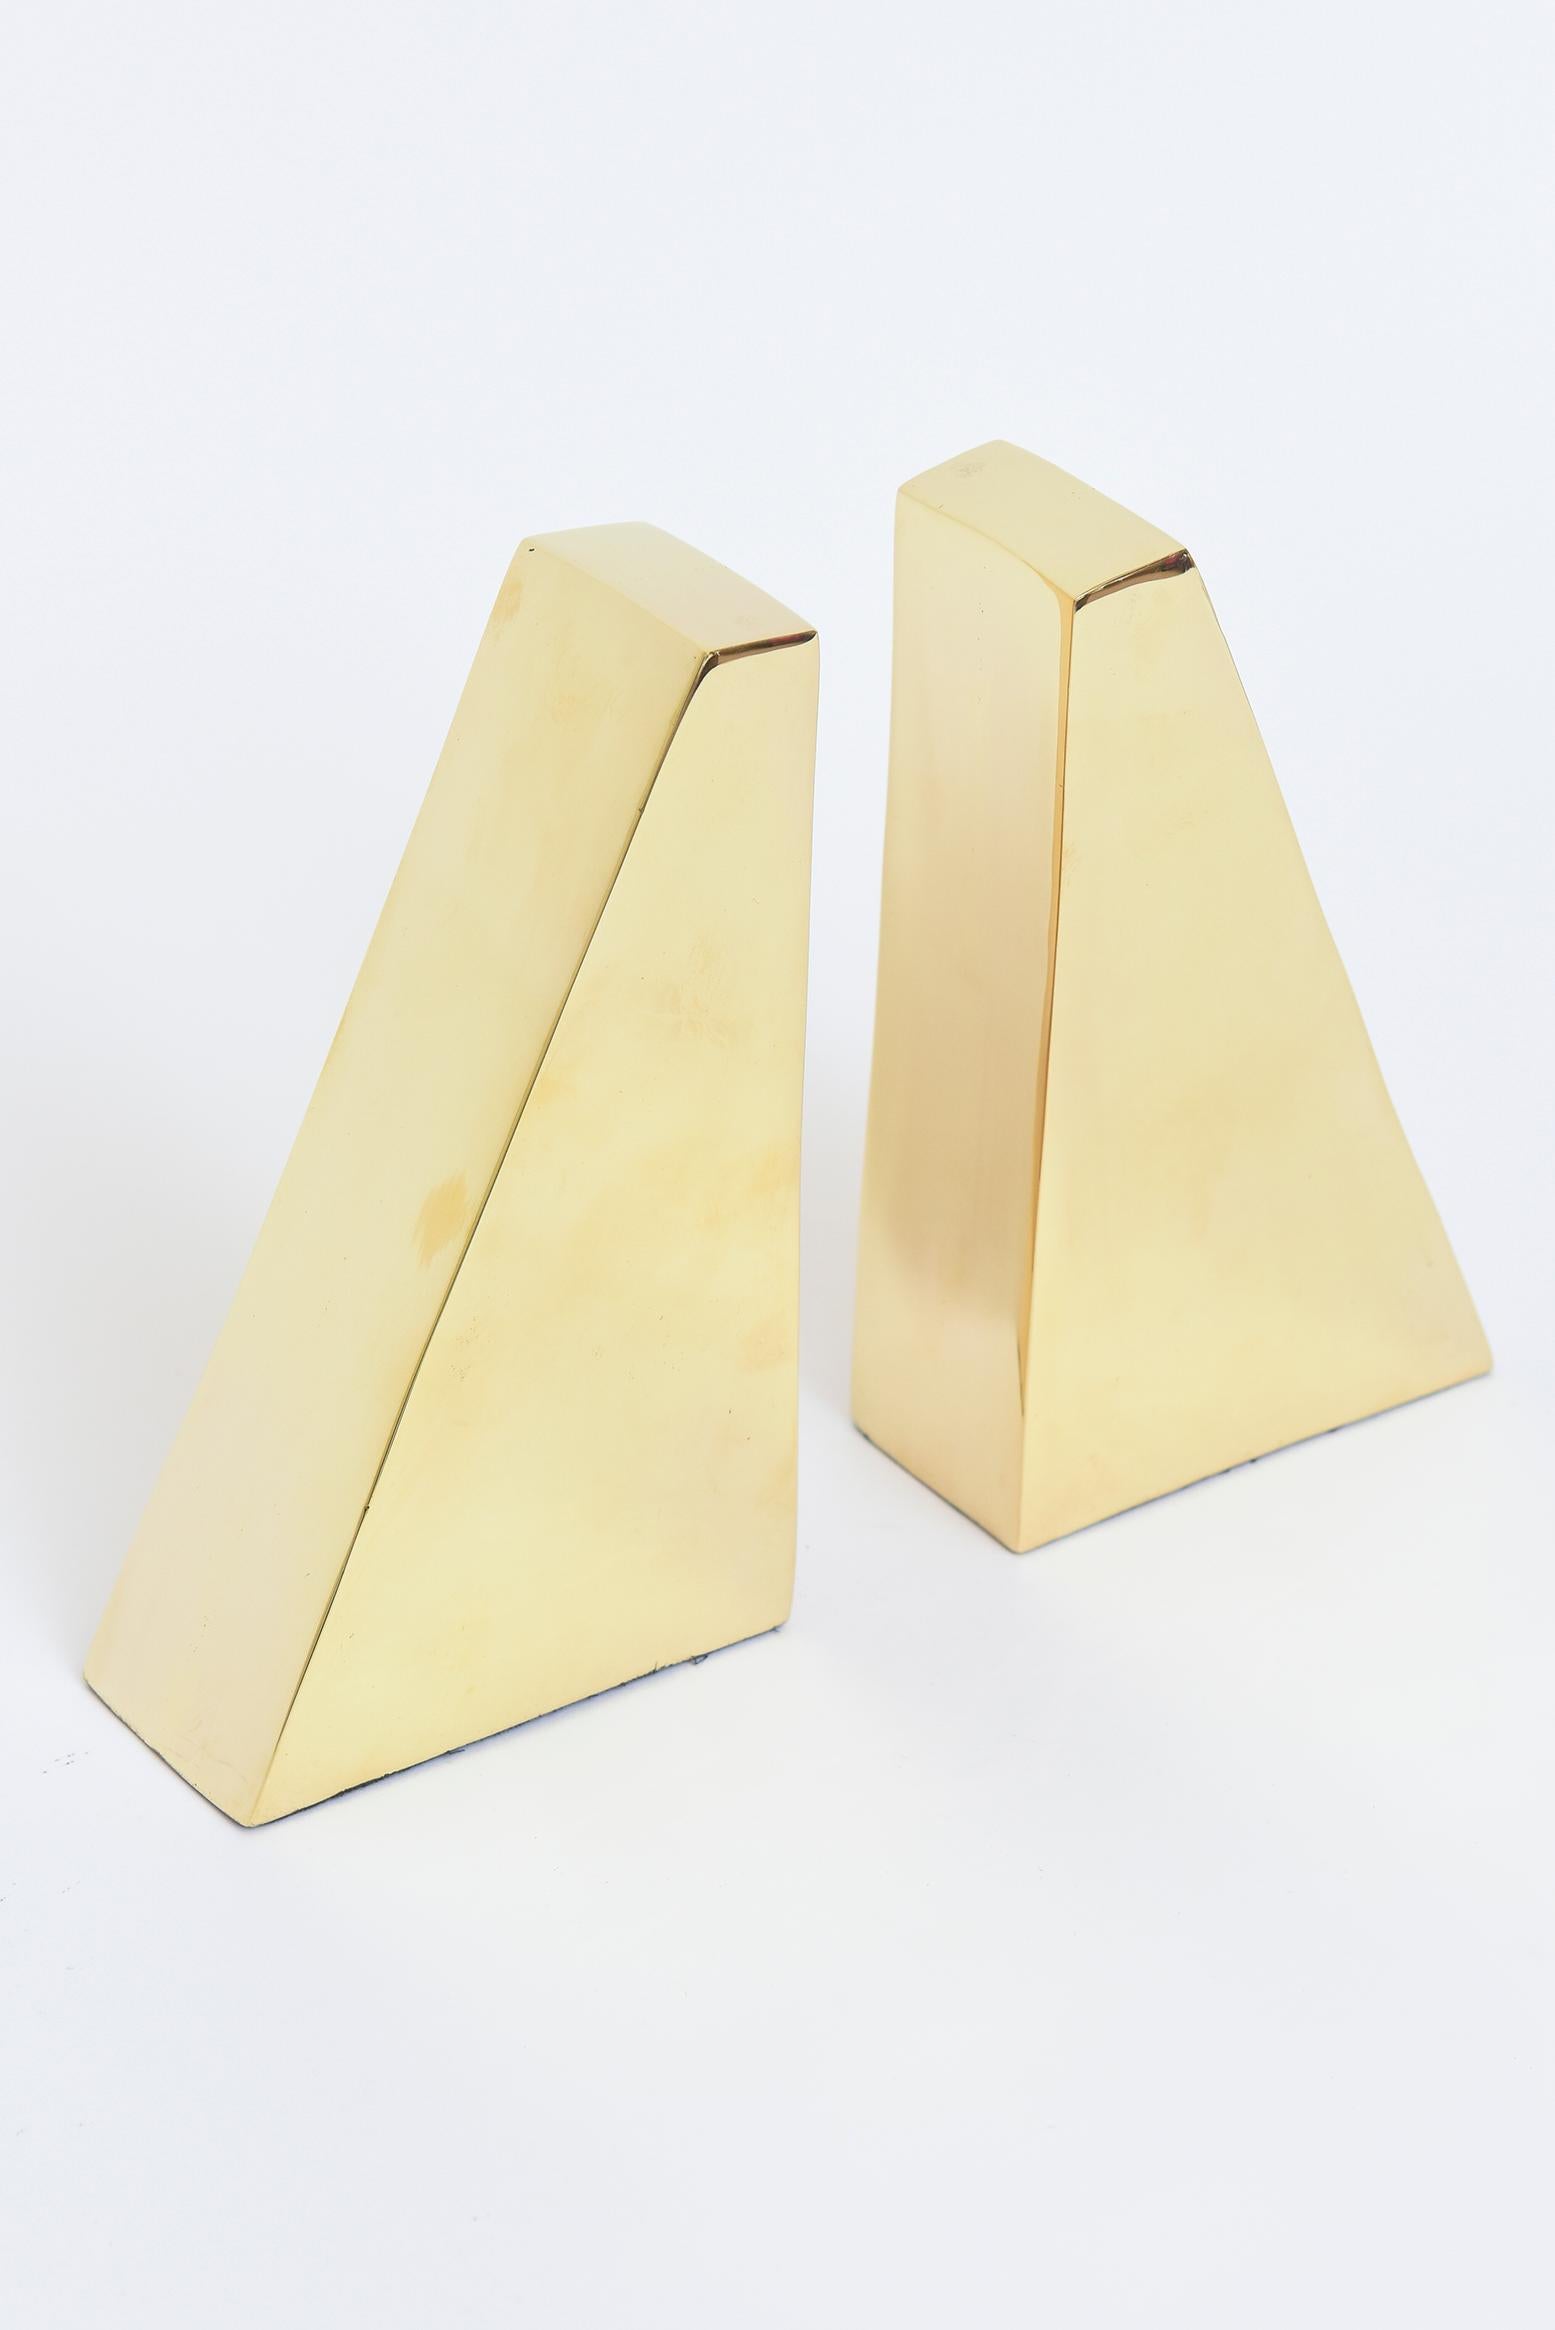 Solid Brass Angled Mid Century Book Ends Pair Of 6